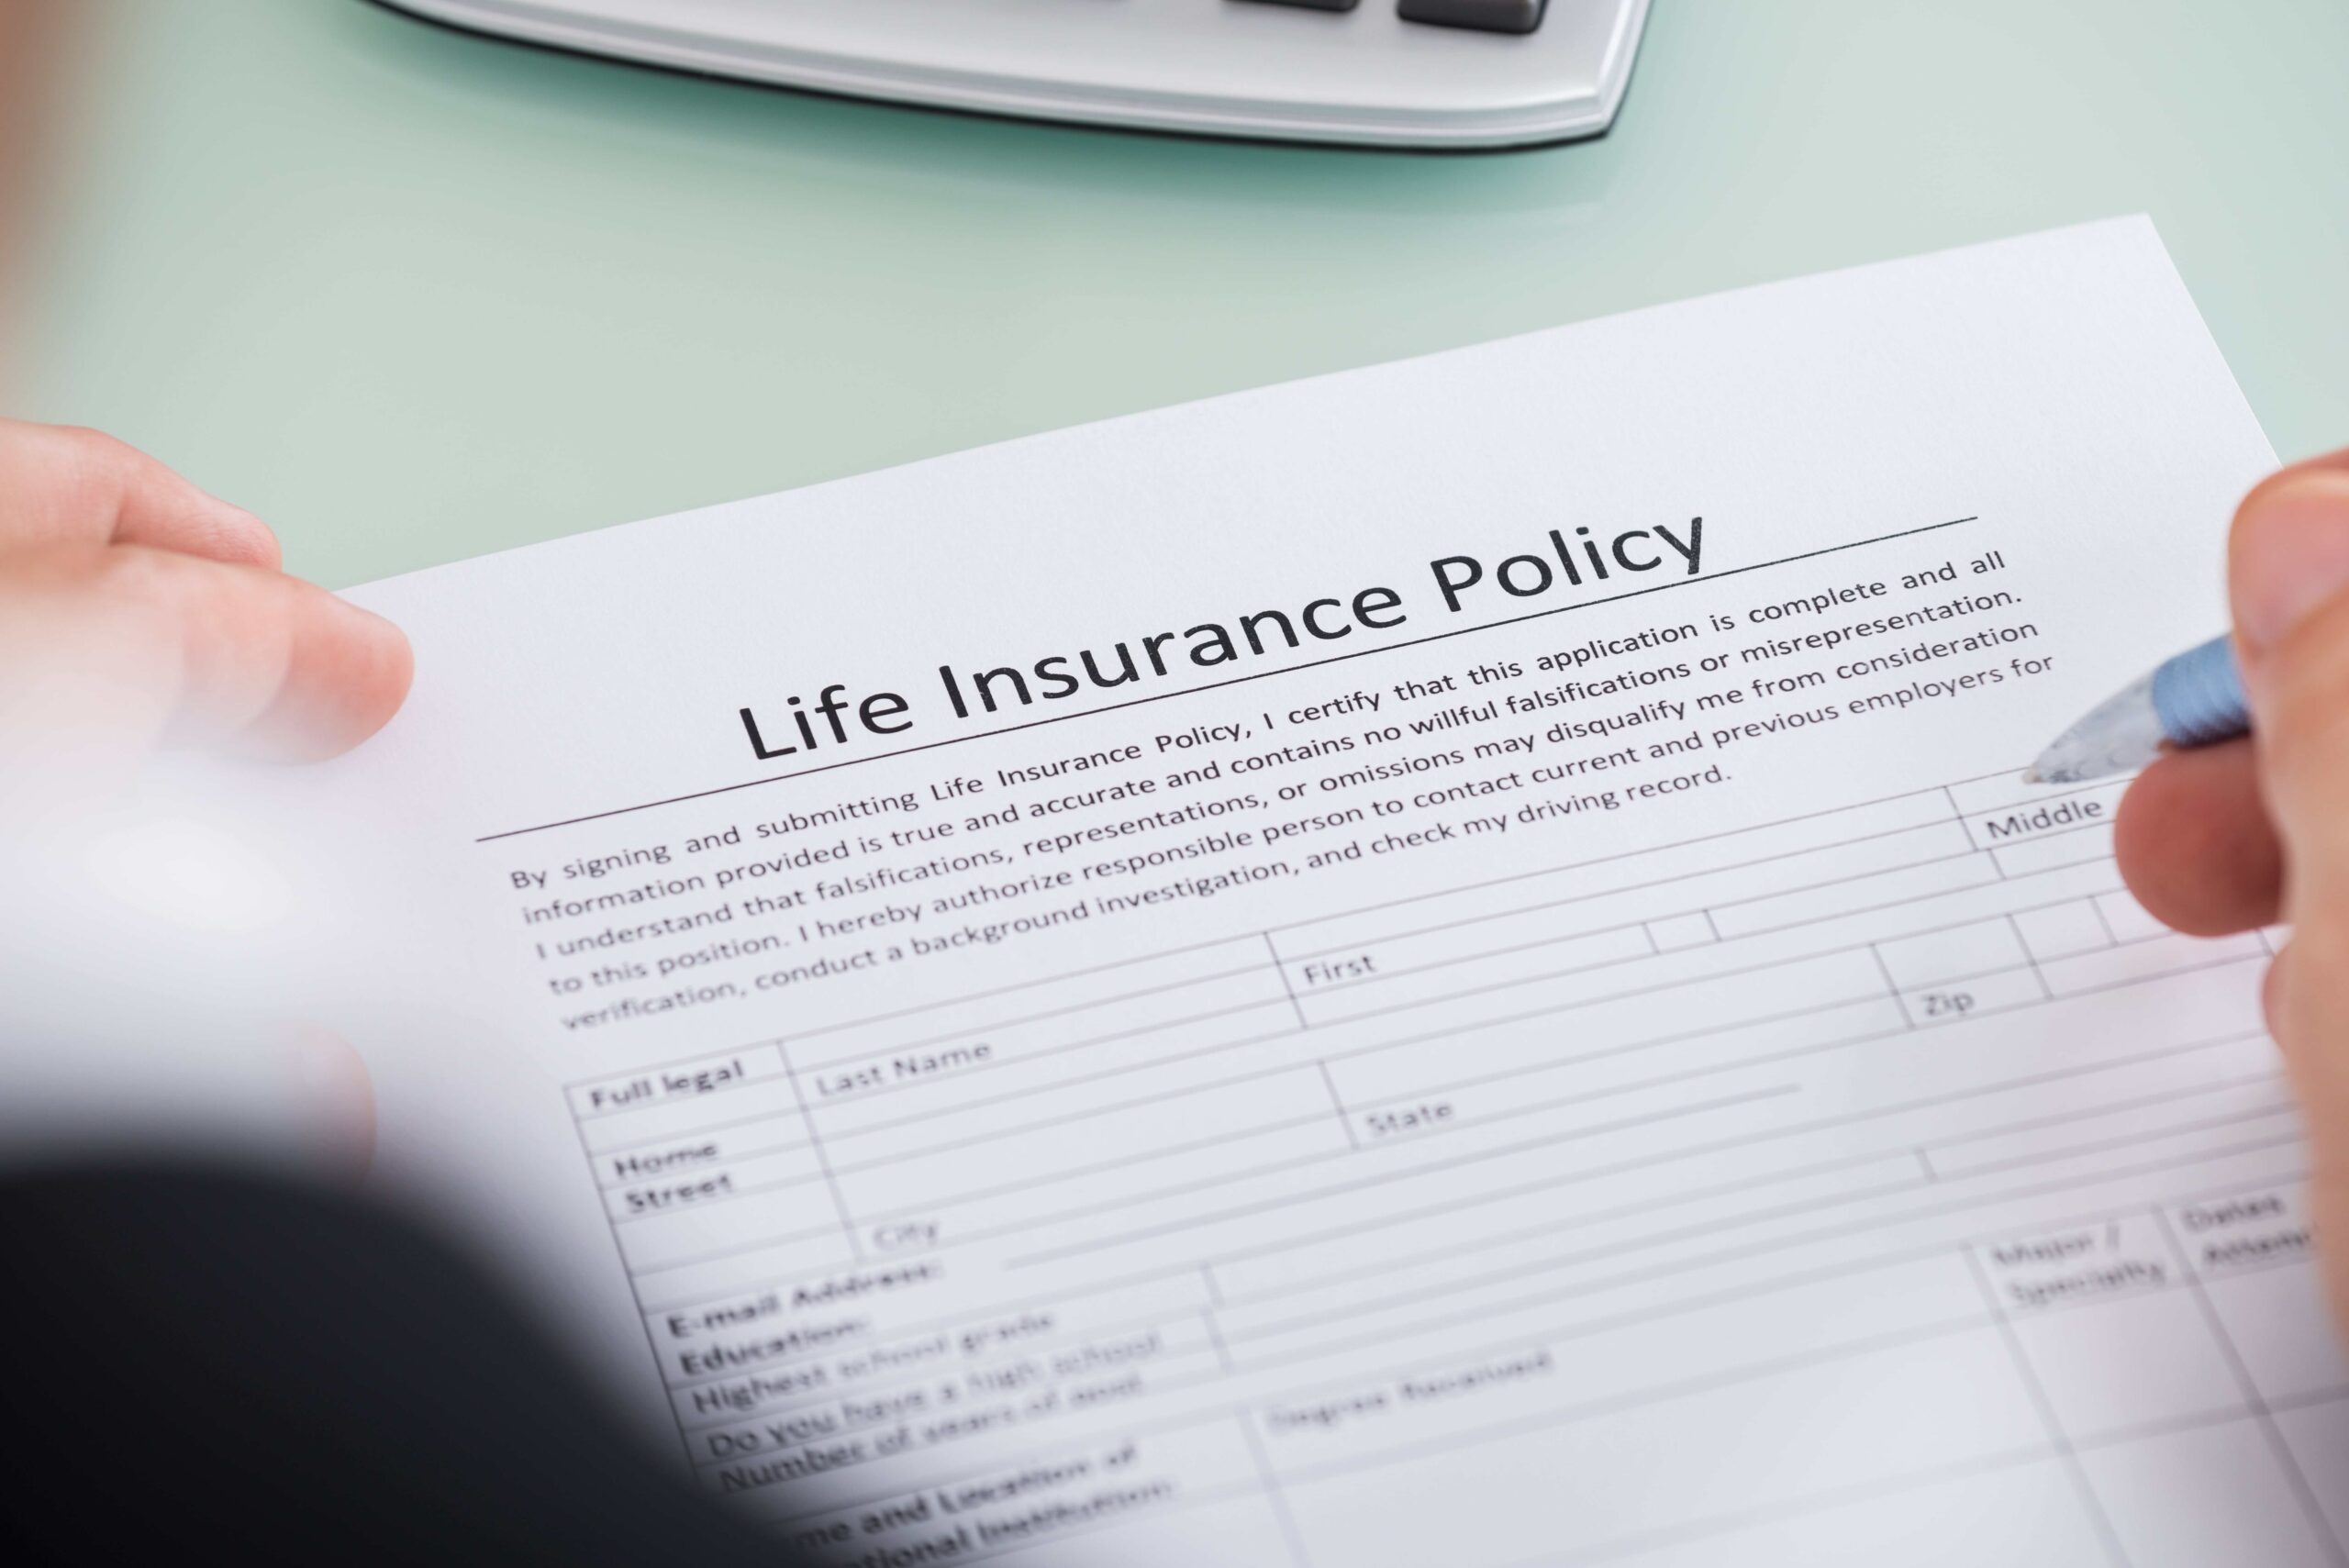 What Does Liquidity Refer To In A Life Insurance Policy?